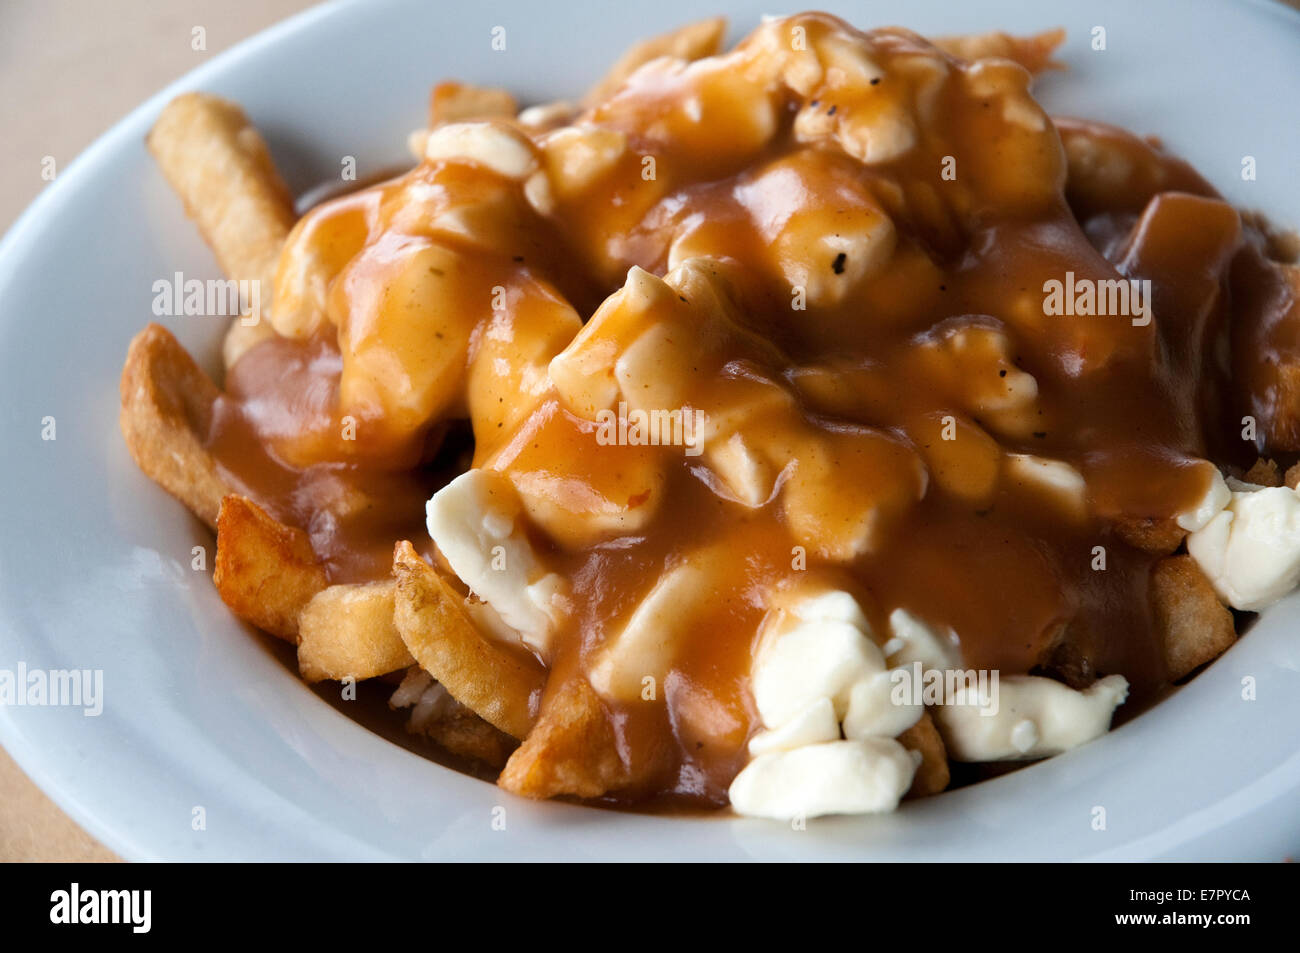 The famous 'traditional' poutine at Le Roy Jucep restaurant (the inventors of the dish) in Drummondville, Quebec, Canada. Stock Photo